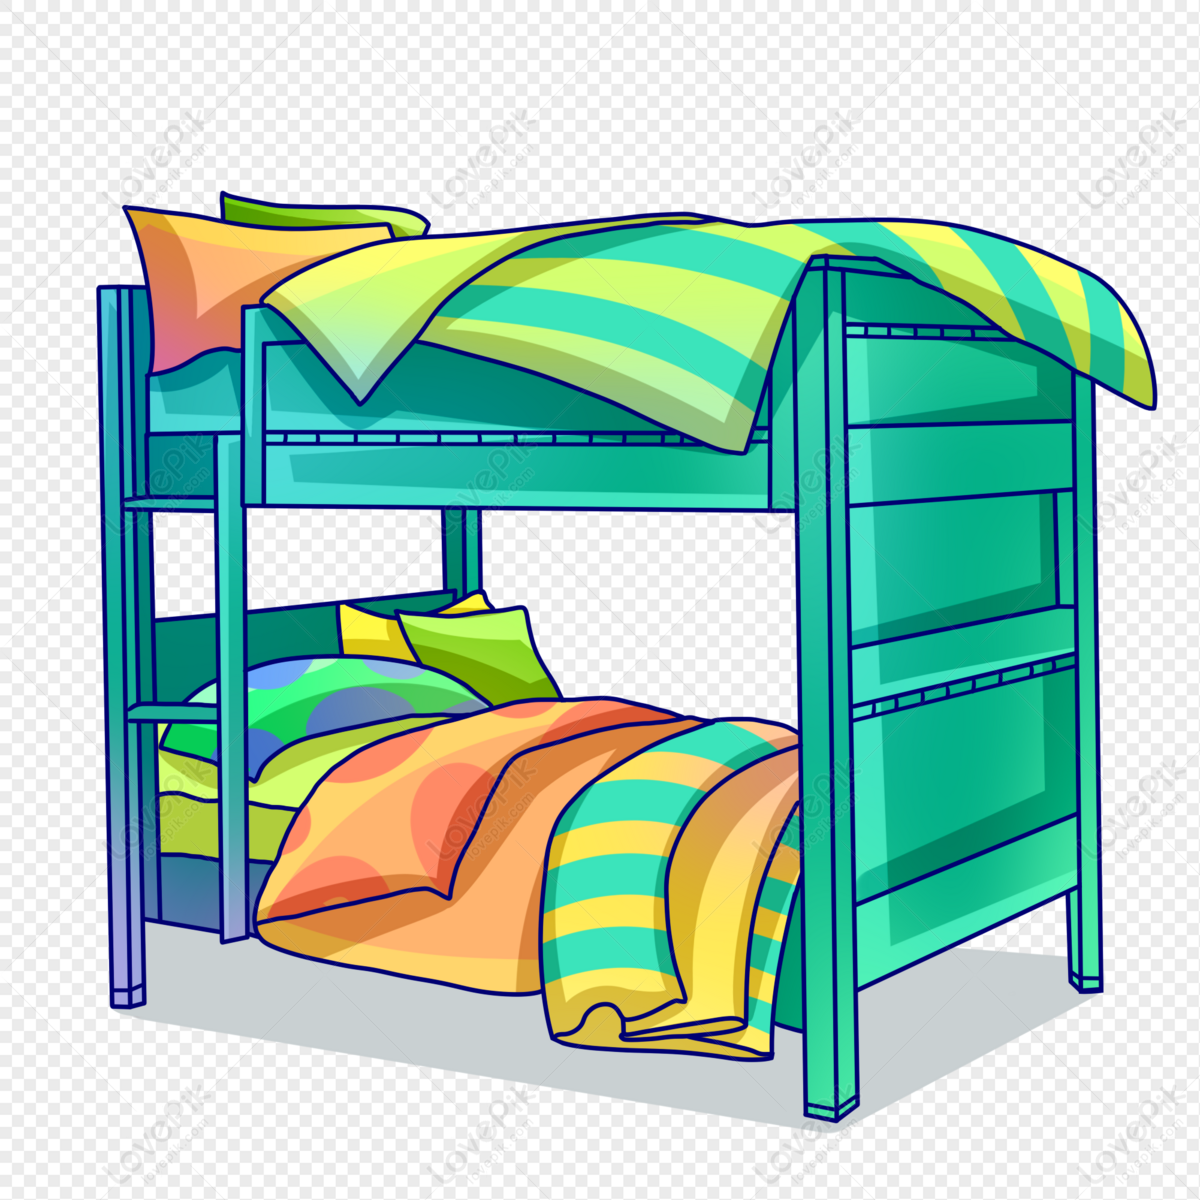 Bunk Bed Free PNG And Clipart Image For Free Download - Lovepik | 401529739